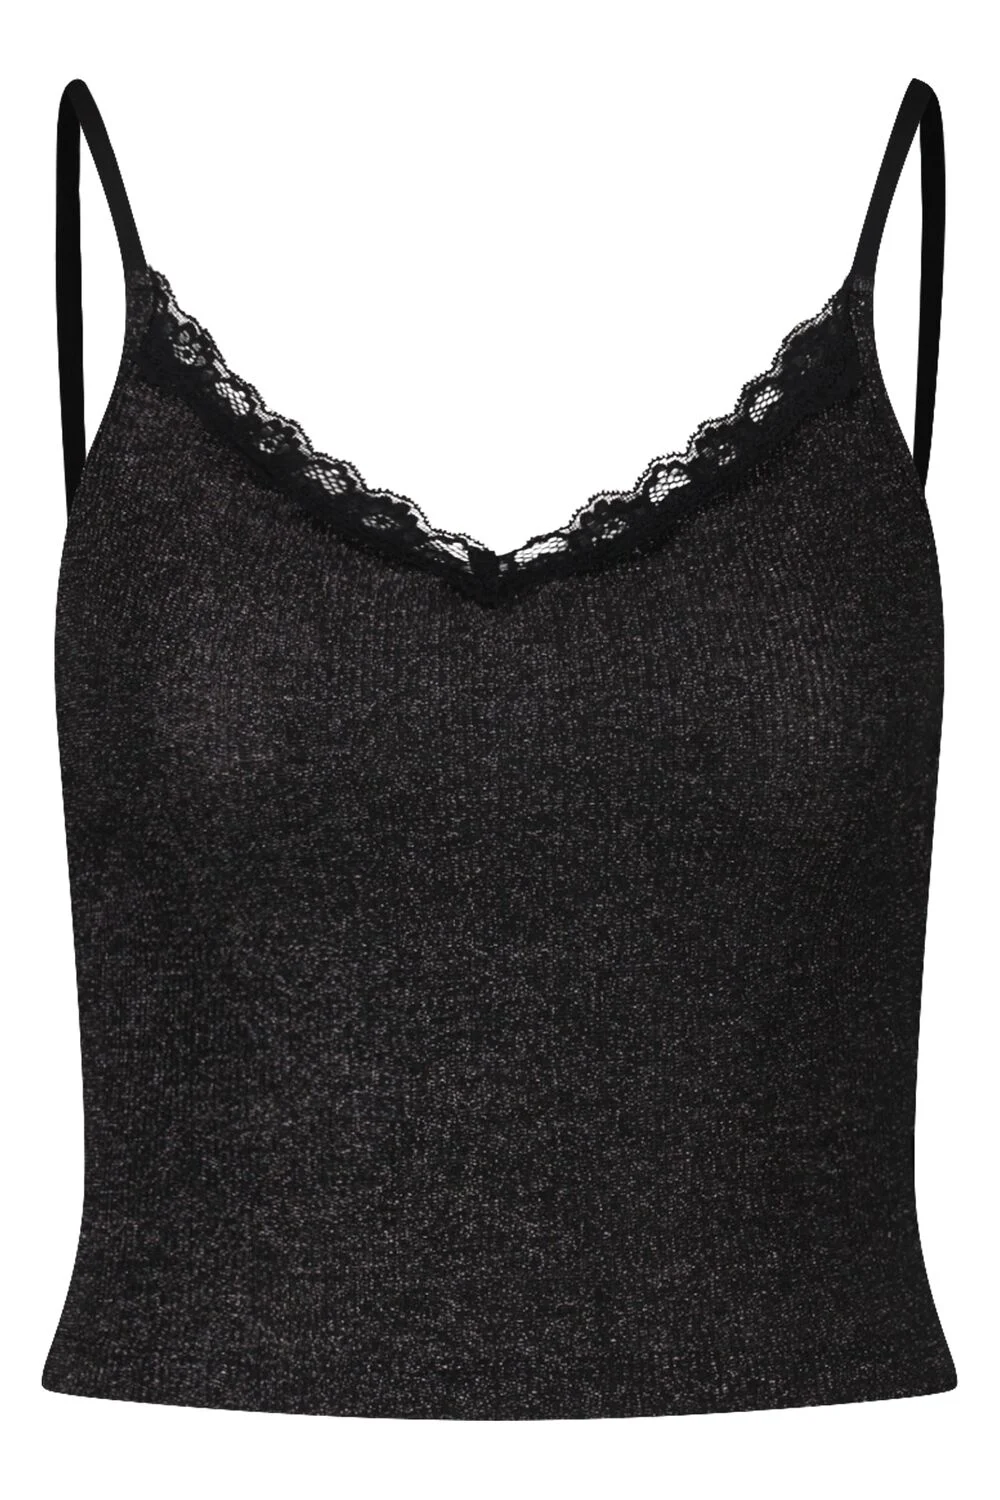 America Today Singlet grace cropped lurex